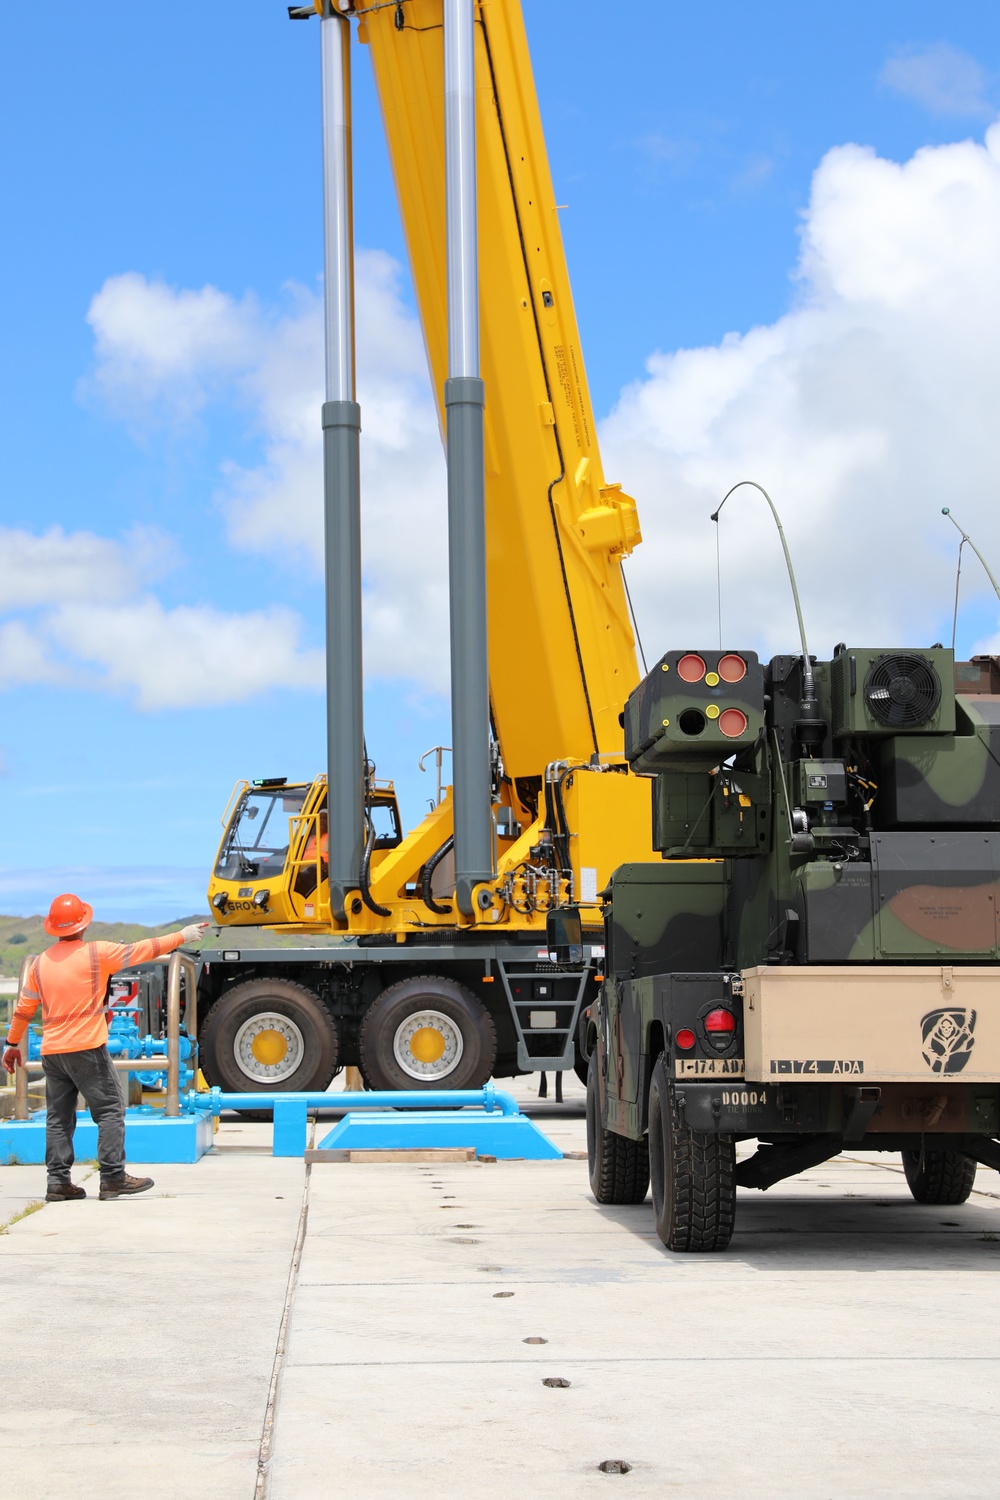 Soldiers Load Avenger Air Defense System onto Army Watercraft System for Forager 21